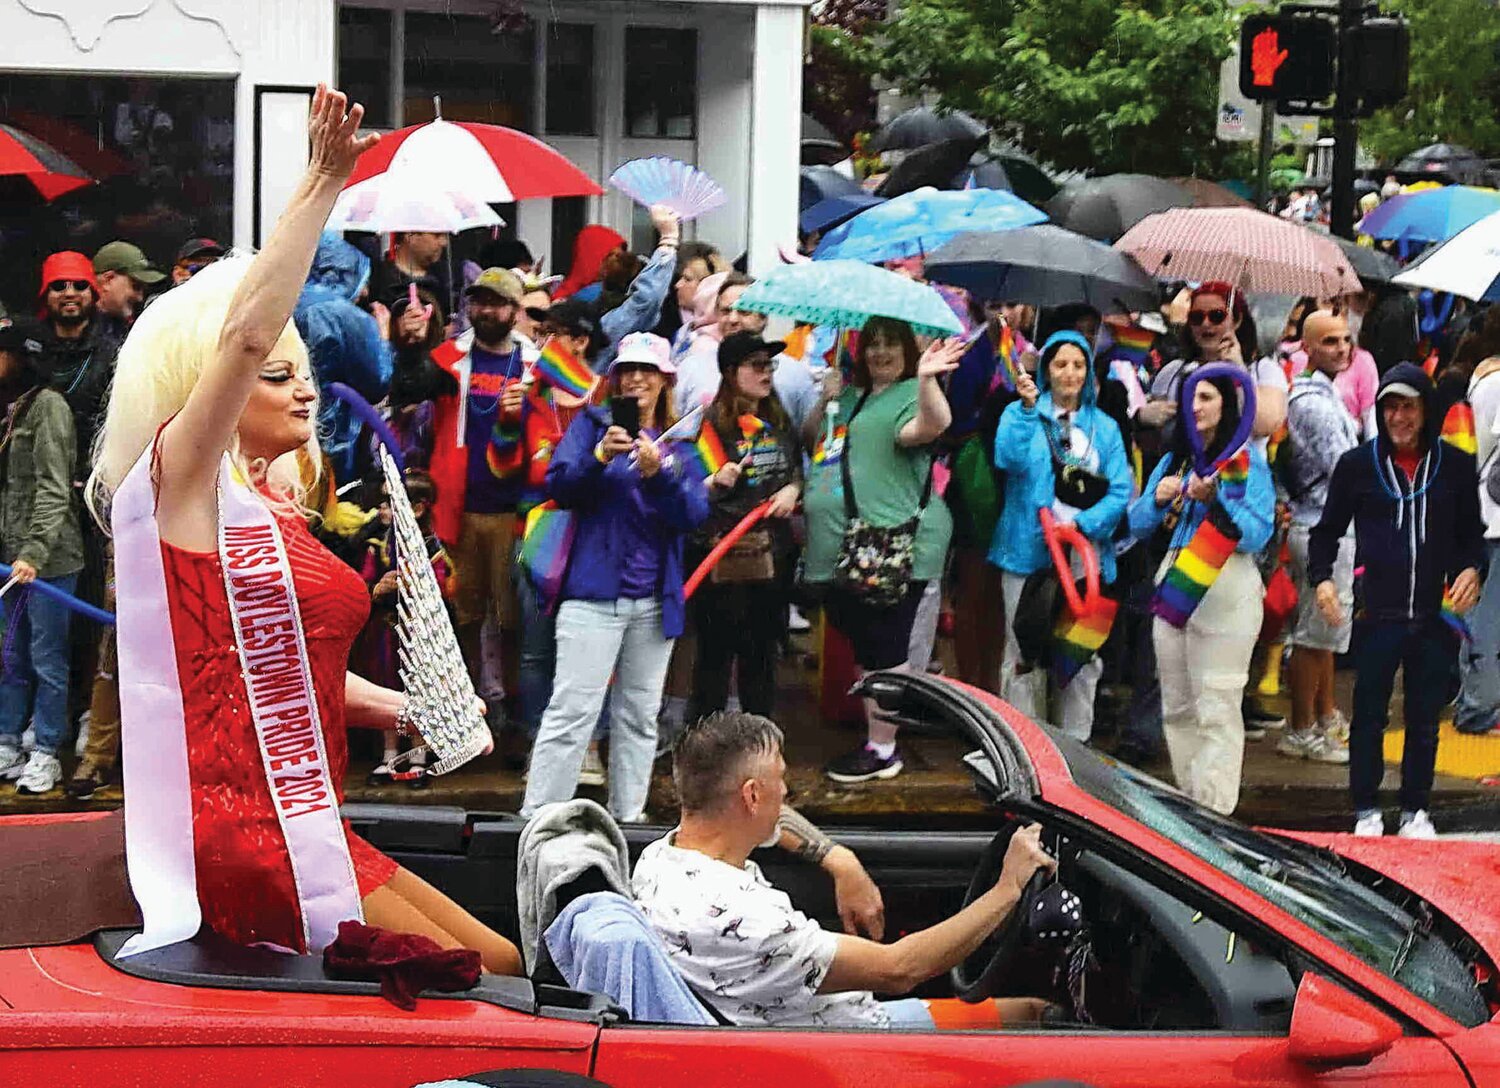 Miss Doylestown Pride 2021 rides along the parade route.